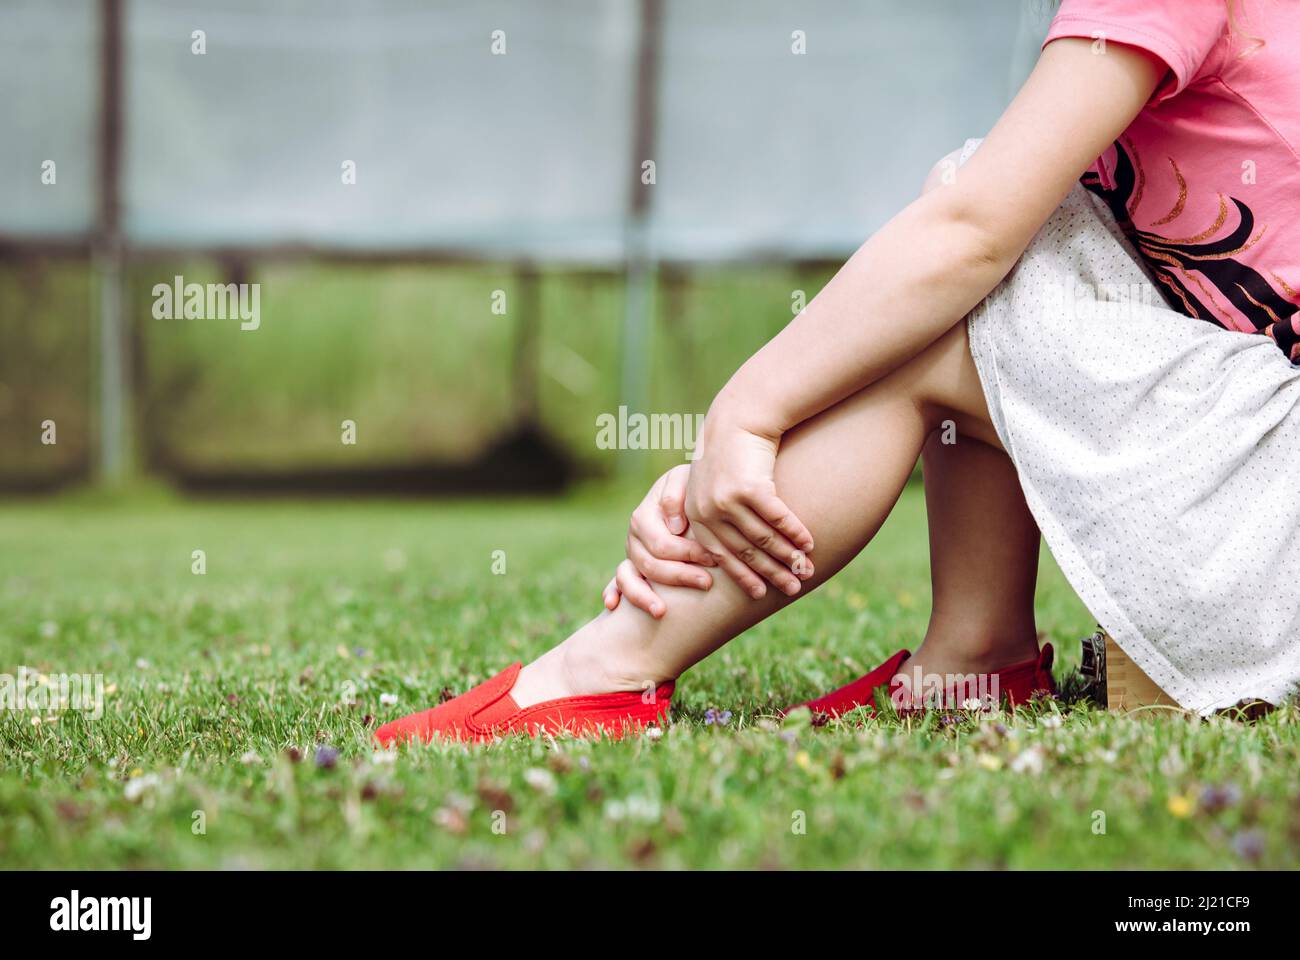 Trampoline jumping accident concept. Girl child holding sprained ankle with hands outdoors by the home garden trampoline. Hazards at home concept. Stock Photo